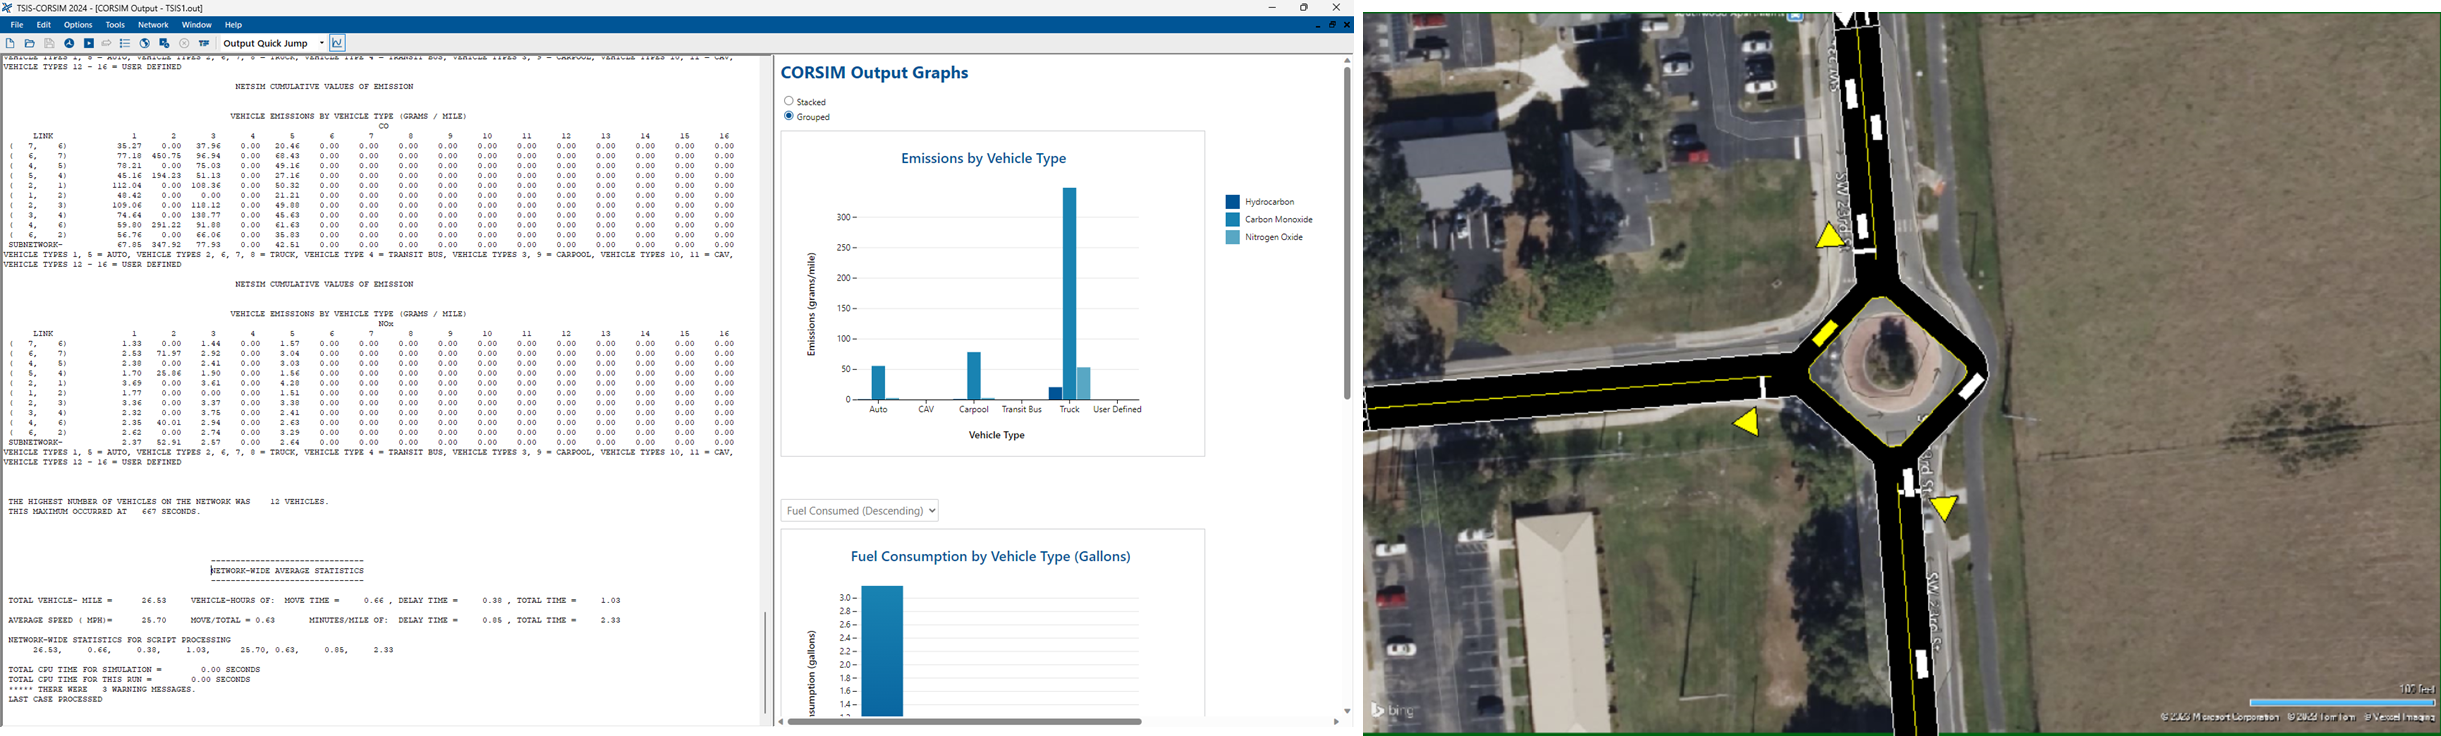 Side-by-side image of TSIS-CORSIM. The left side shows the analyze key performance metrics. The right side shows the map-view of a roundabout.